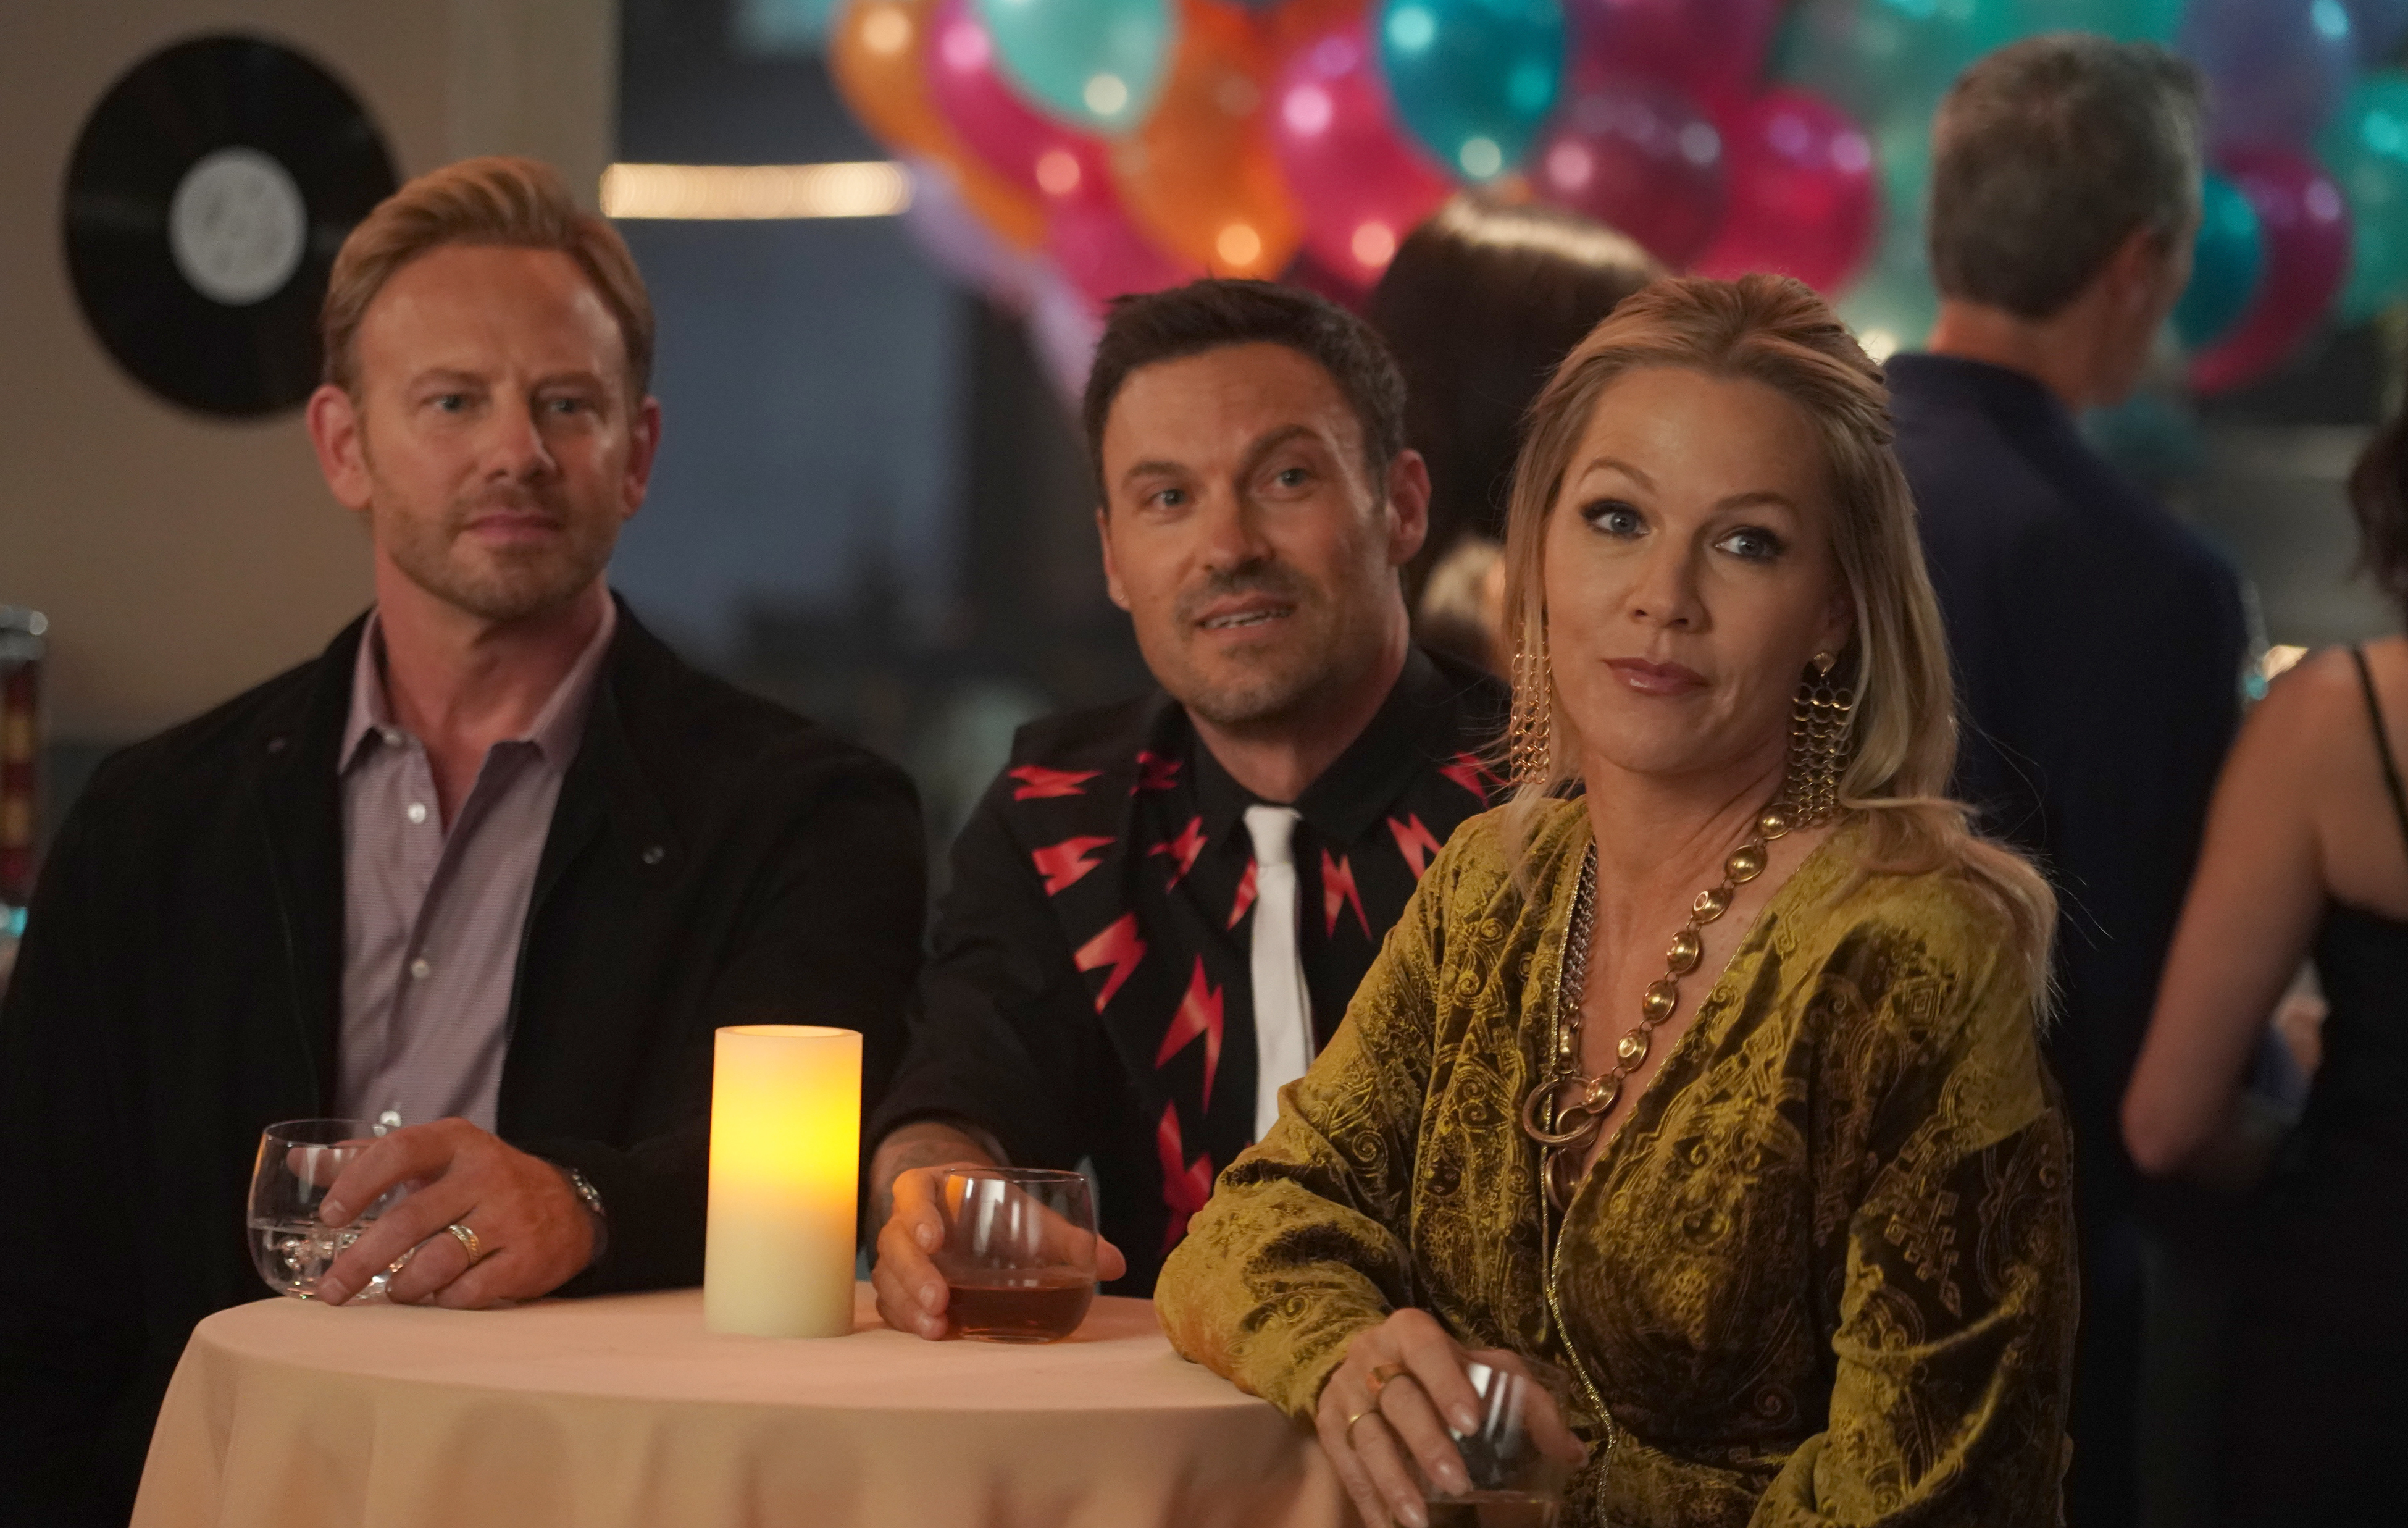 Reboots? Some are fine; “BH90210” isn’t